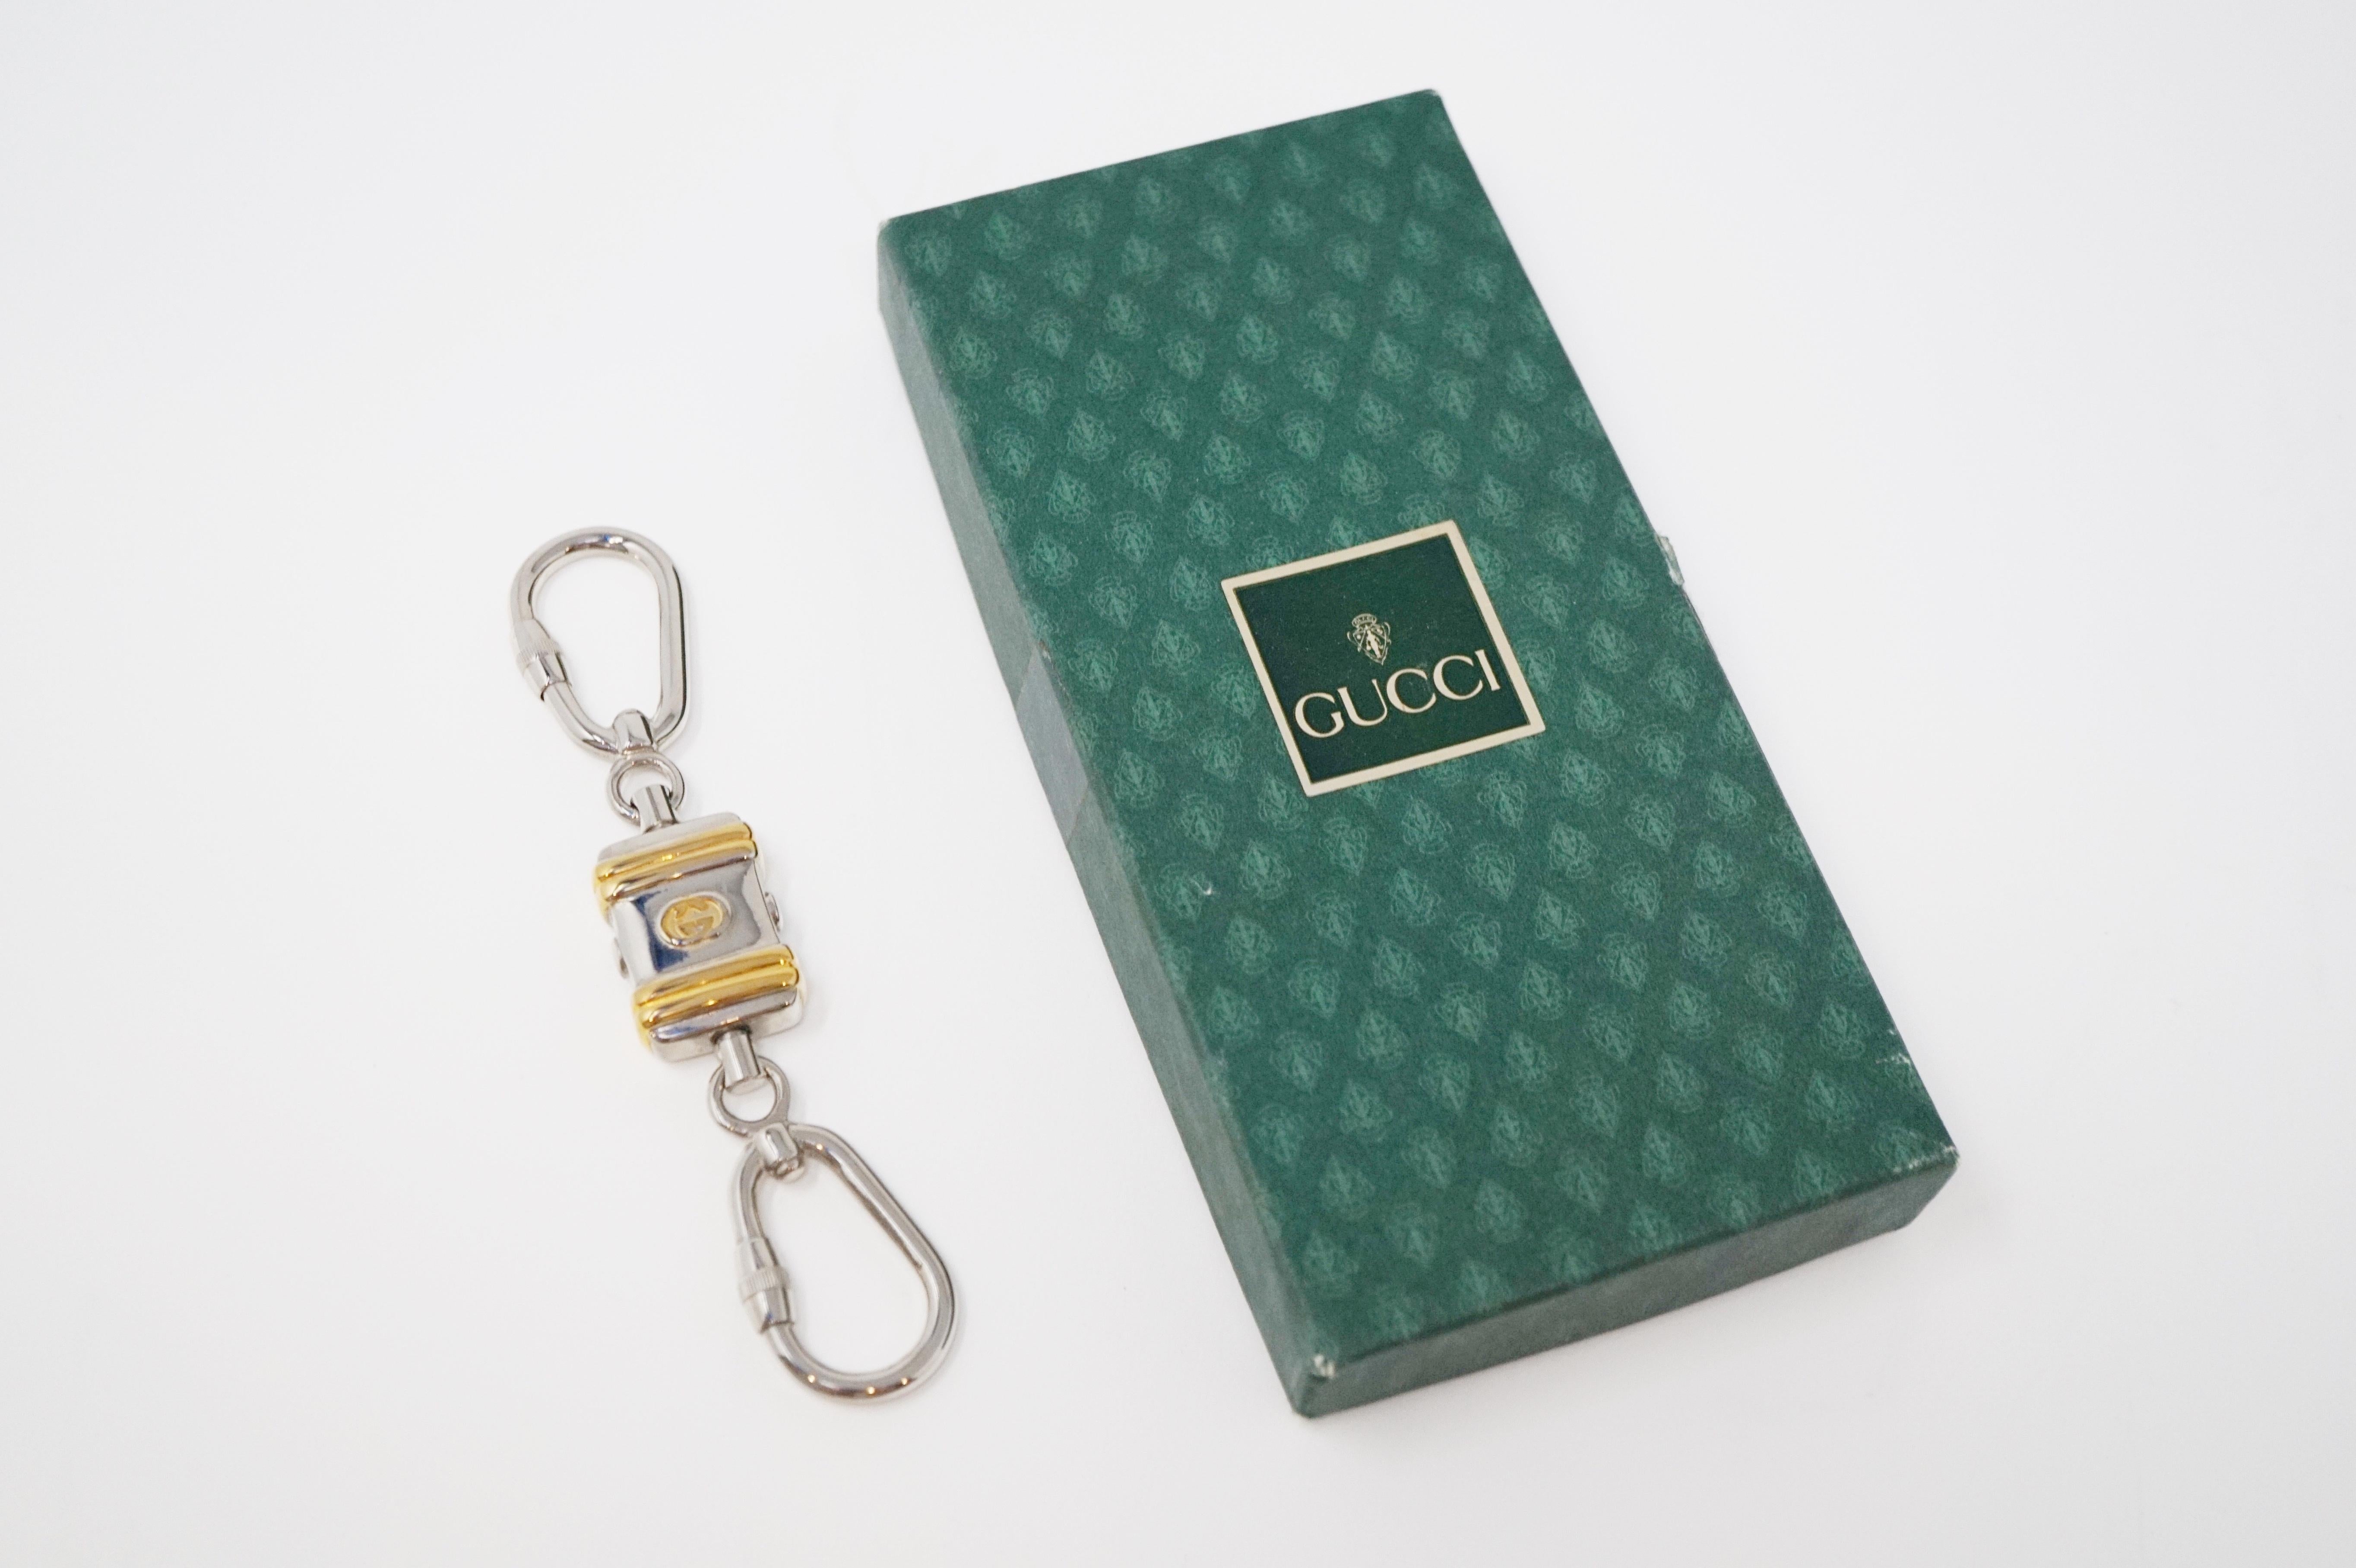 Gucci Logo Double Key Ring in Original Box, Made in Italy circa 1970, Signed 1